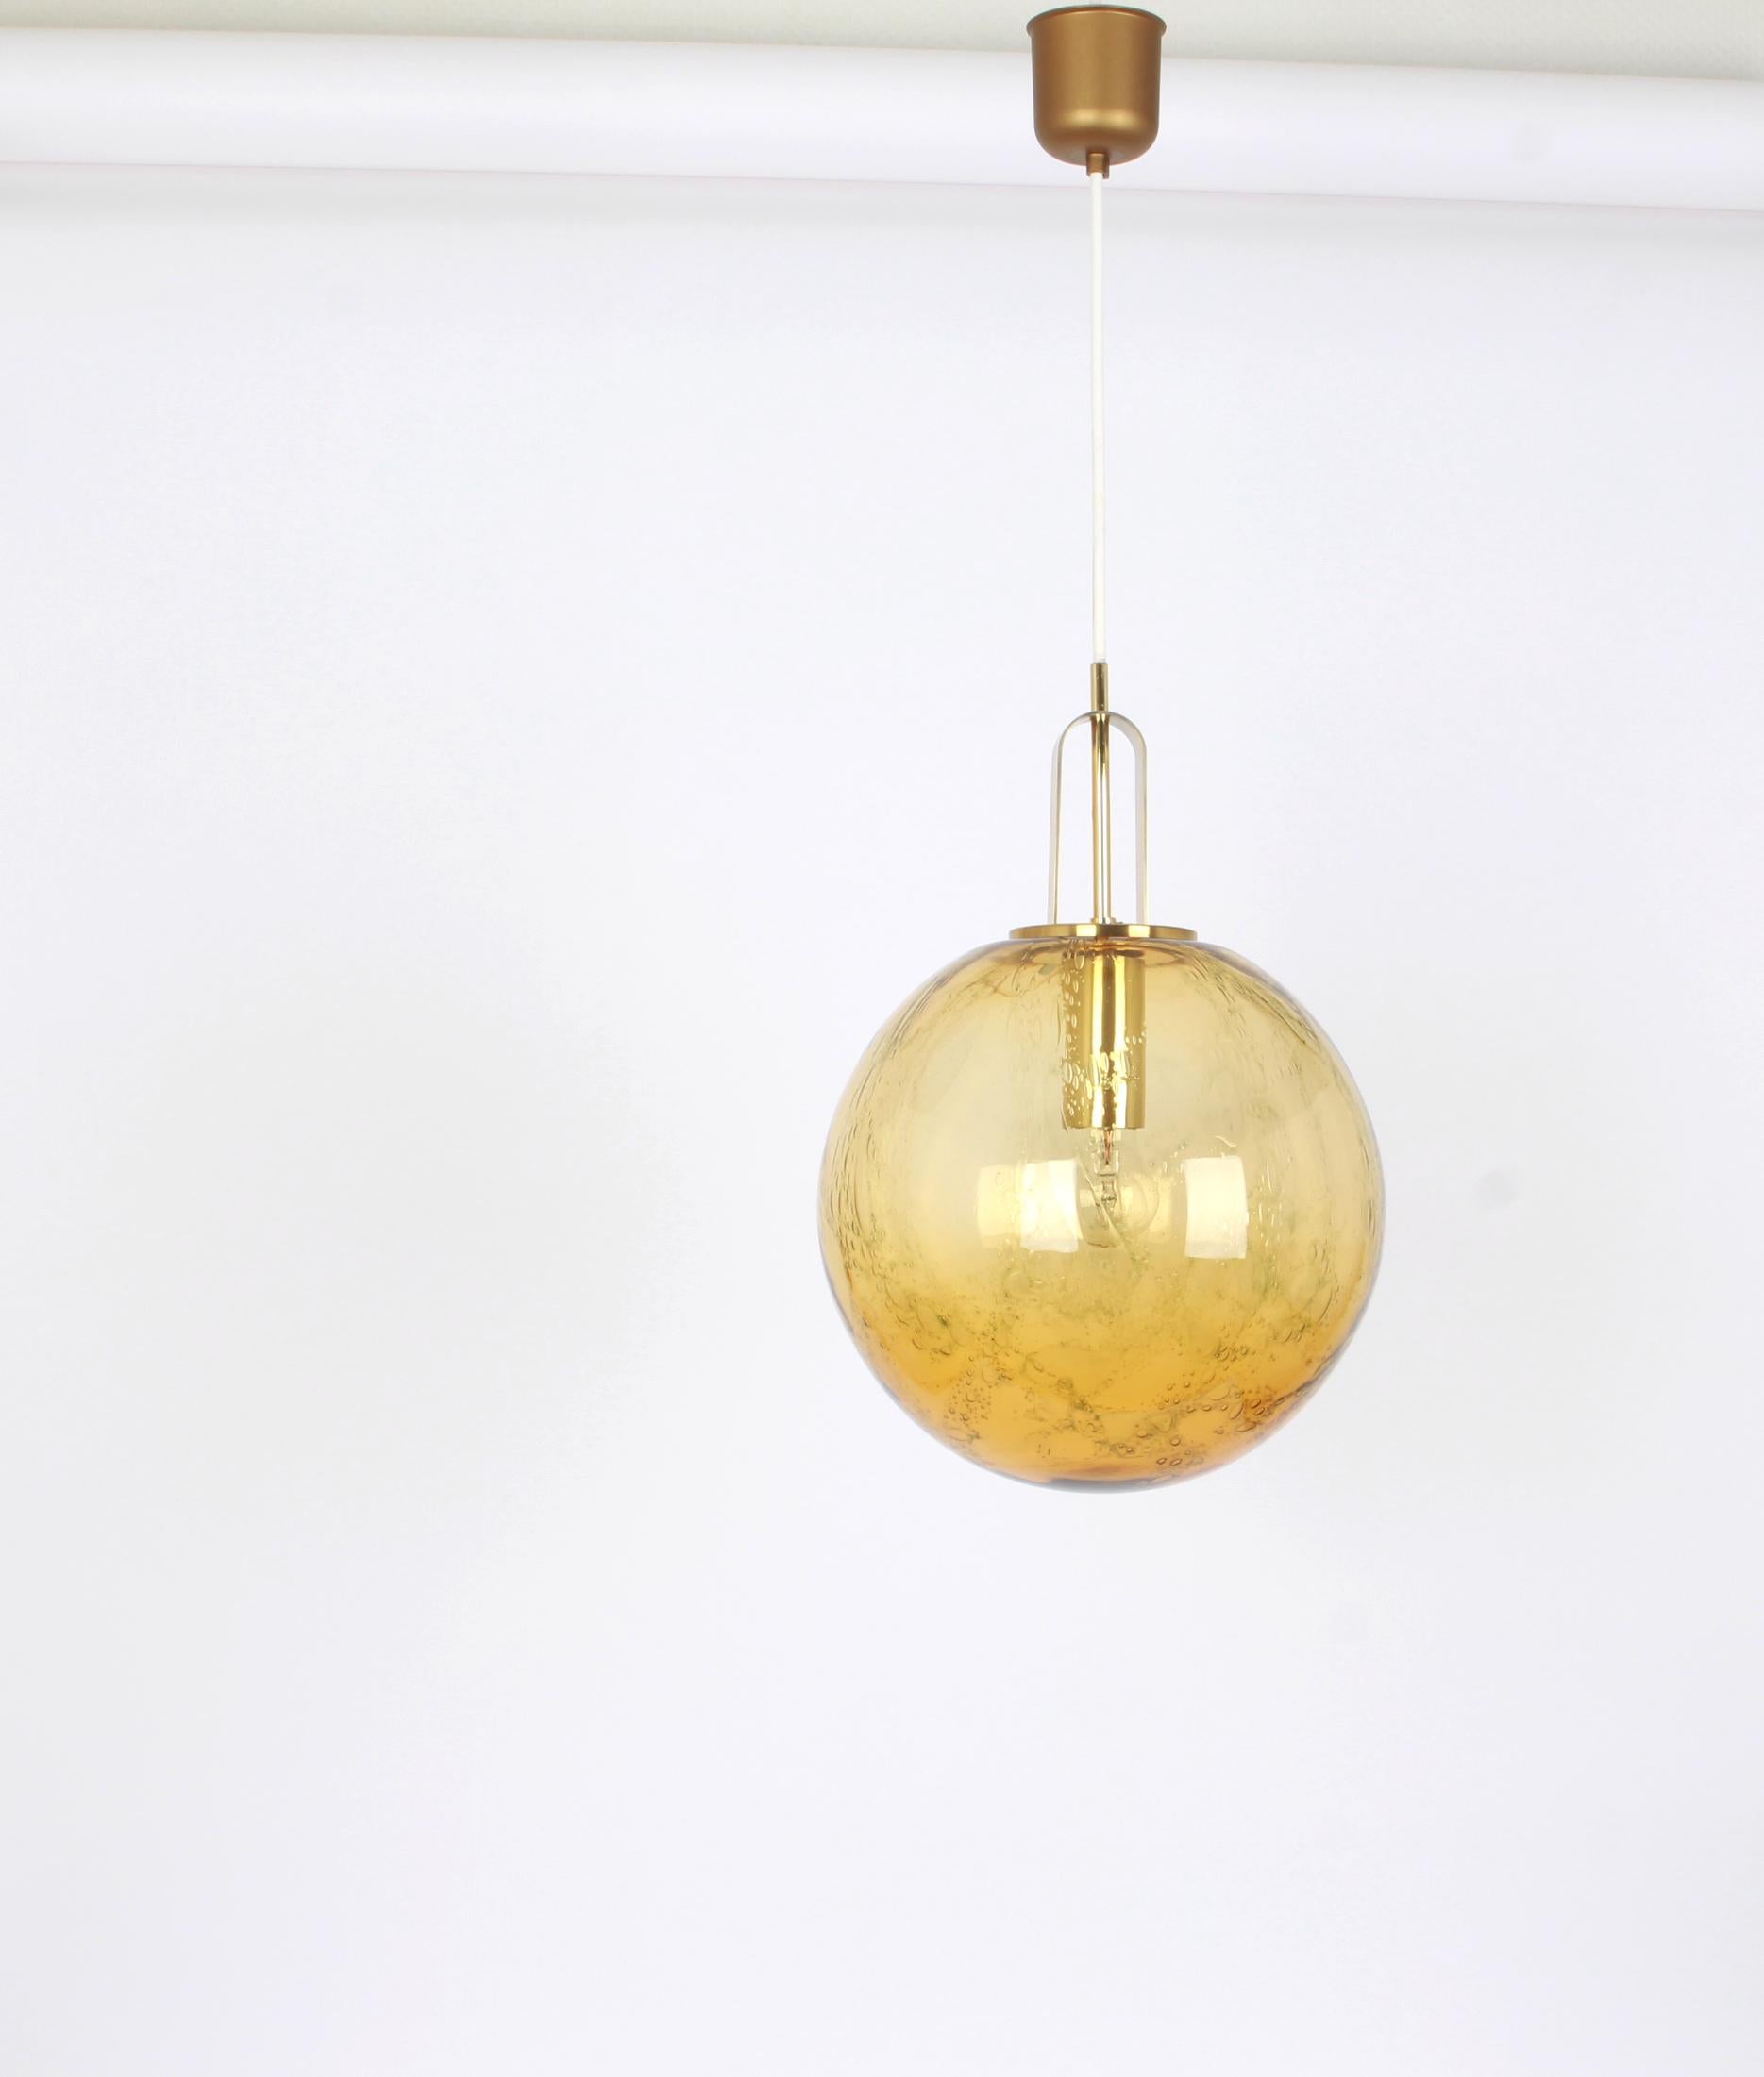 Ceiling light with large volcanic murano glass dome with a brass frame made by Doira, Germany.
Wonderful light effect.
High quality and in very good condition. Cleaned, well-wired and ready to use. 
The fixture requires 1 x E27 Standard bulbs with